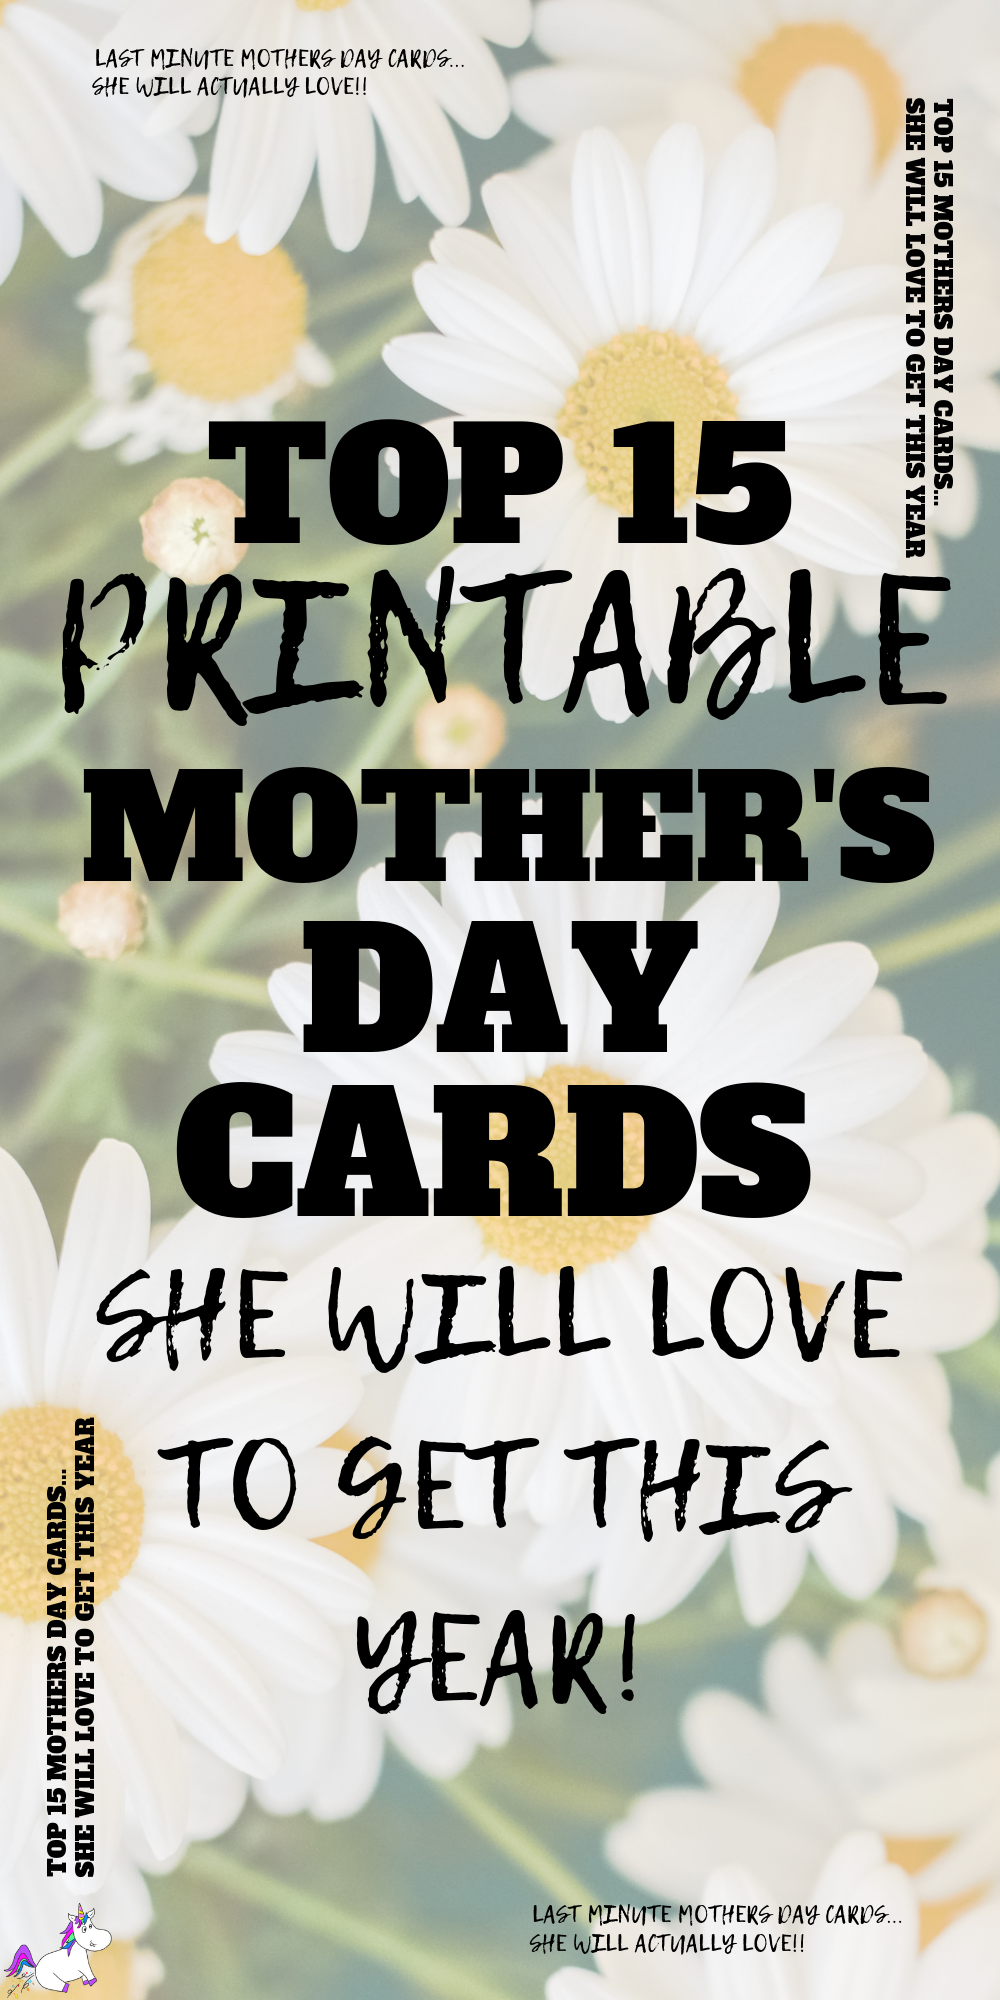 Top 15 Printable Mothers Day Cards She Will Love To Get This Year | DIY Mothers Days Cards | Last Minute Mothers Day Cards | Mothers Day 2019 | Via:// https://themummyfront.com #themummyfront #mothersdaycards #printablemothersdaycards #lastminutemothersdaycards #mothersdaycardstocolor #diymothersdaycards